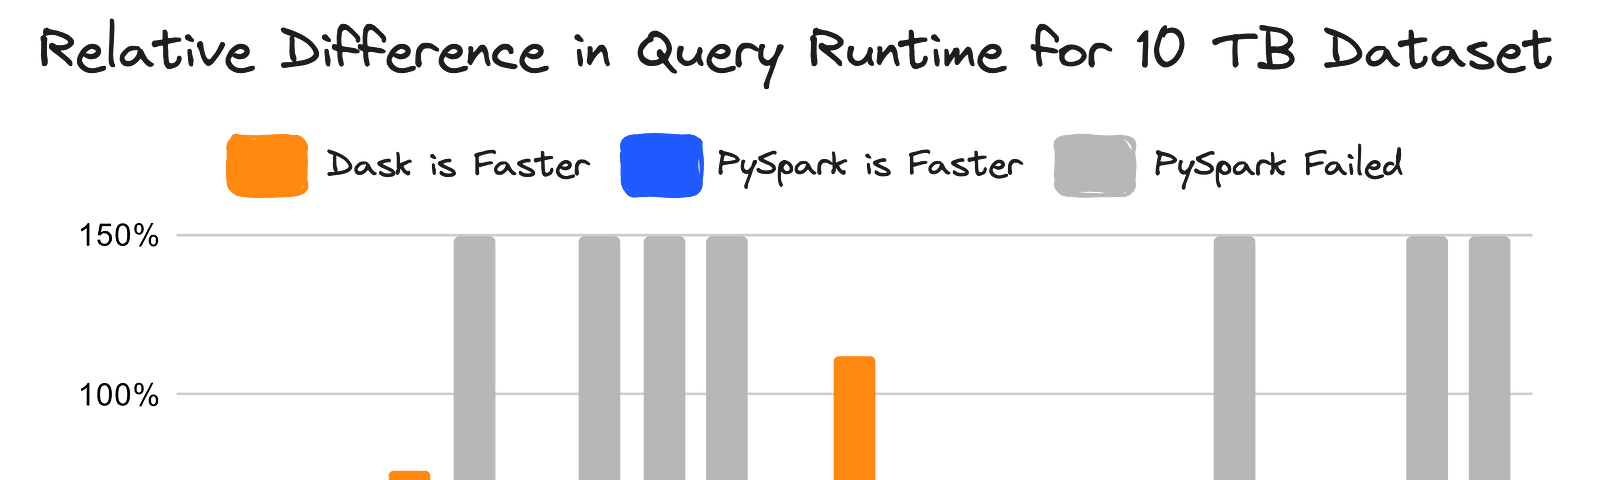 Relative difference between Dask vs. PySpark on 10 TB scale running on a cluster with about 5 TB of memory and 1280 CPUs. Orange represents queries where Dask is faster, blue where PySpark is faster, and grey where PySpark failed.